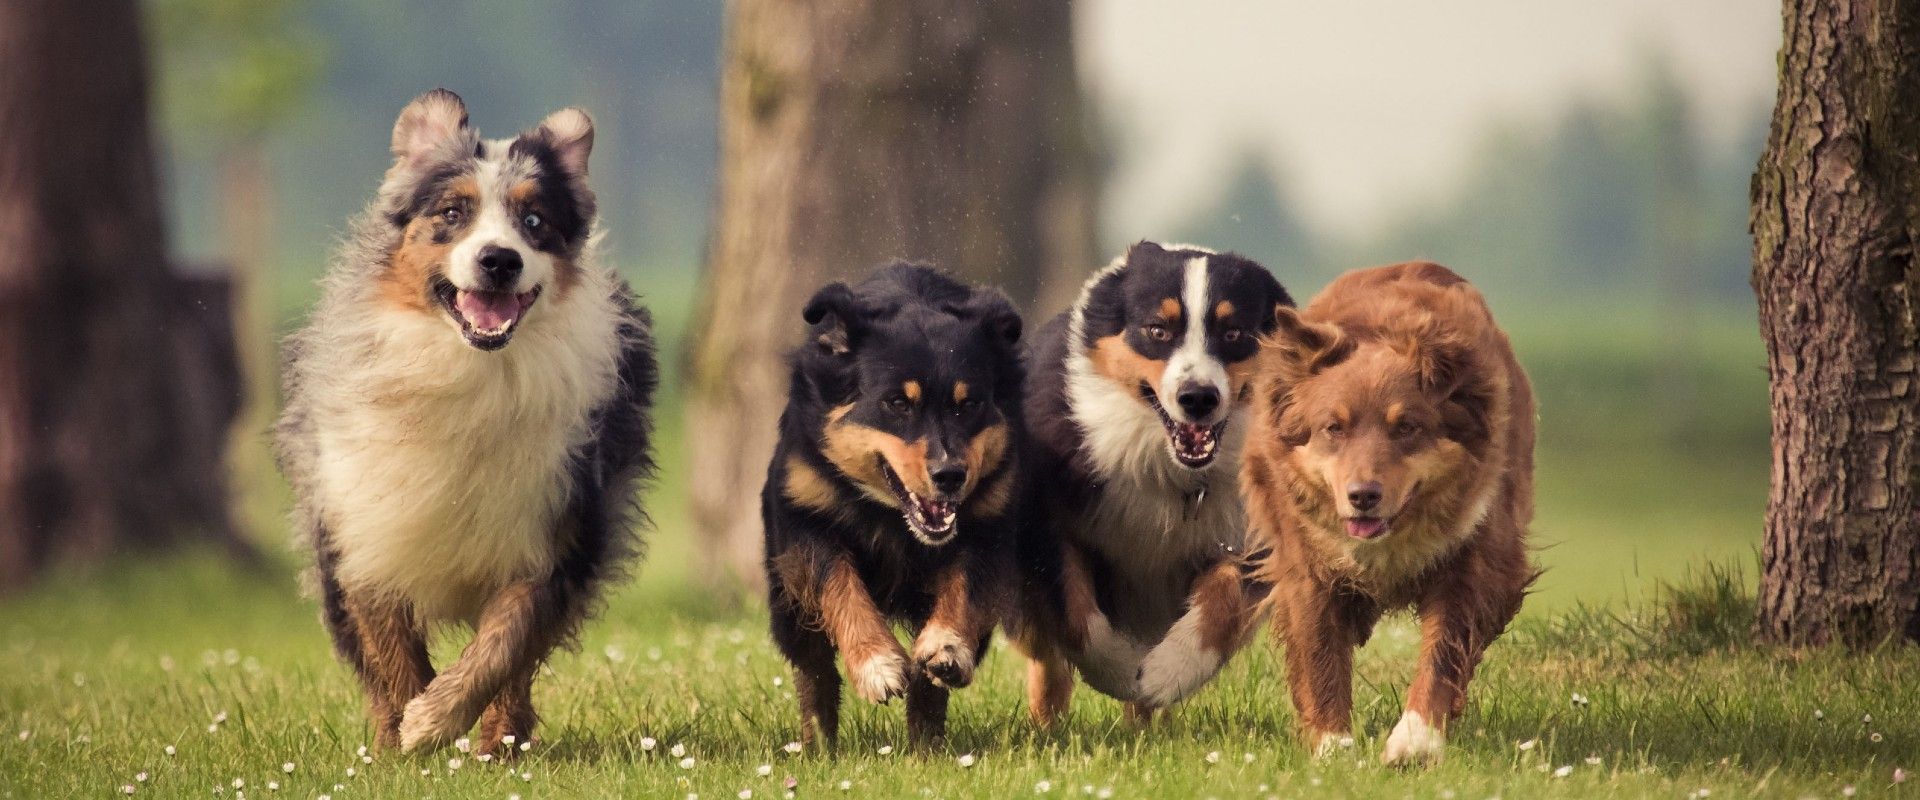 Four dogs running